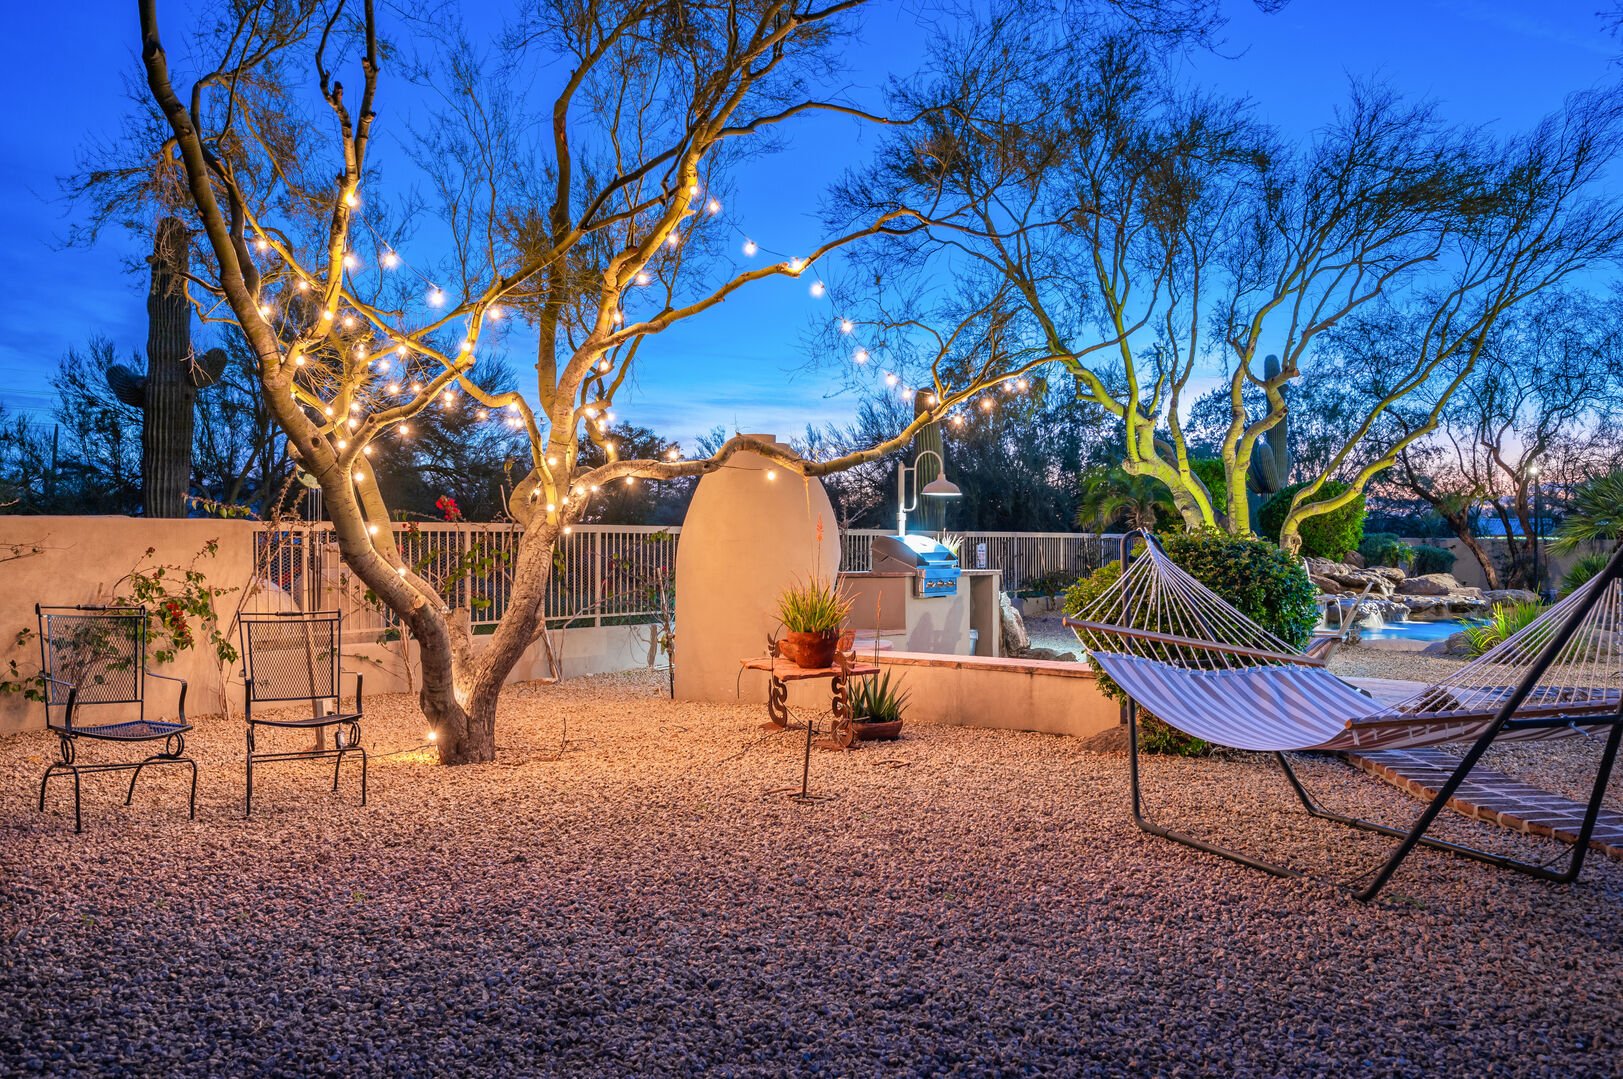 Relax on the casita under twinkling lights.